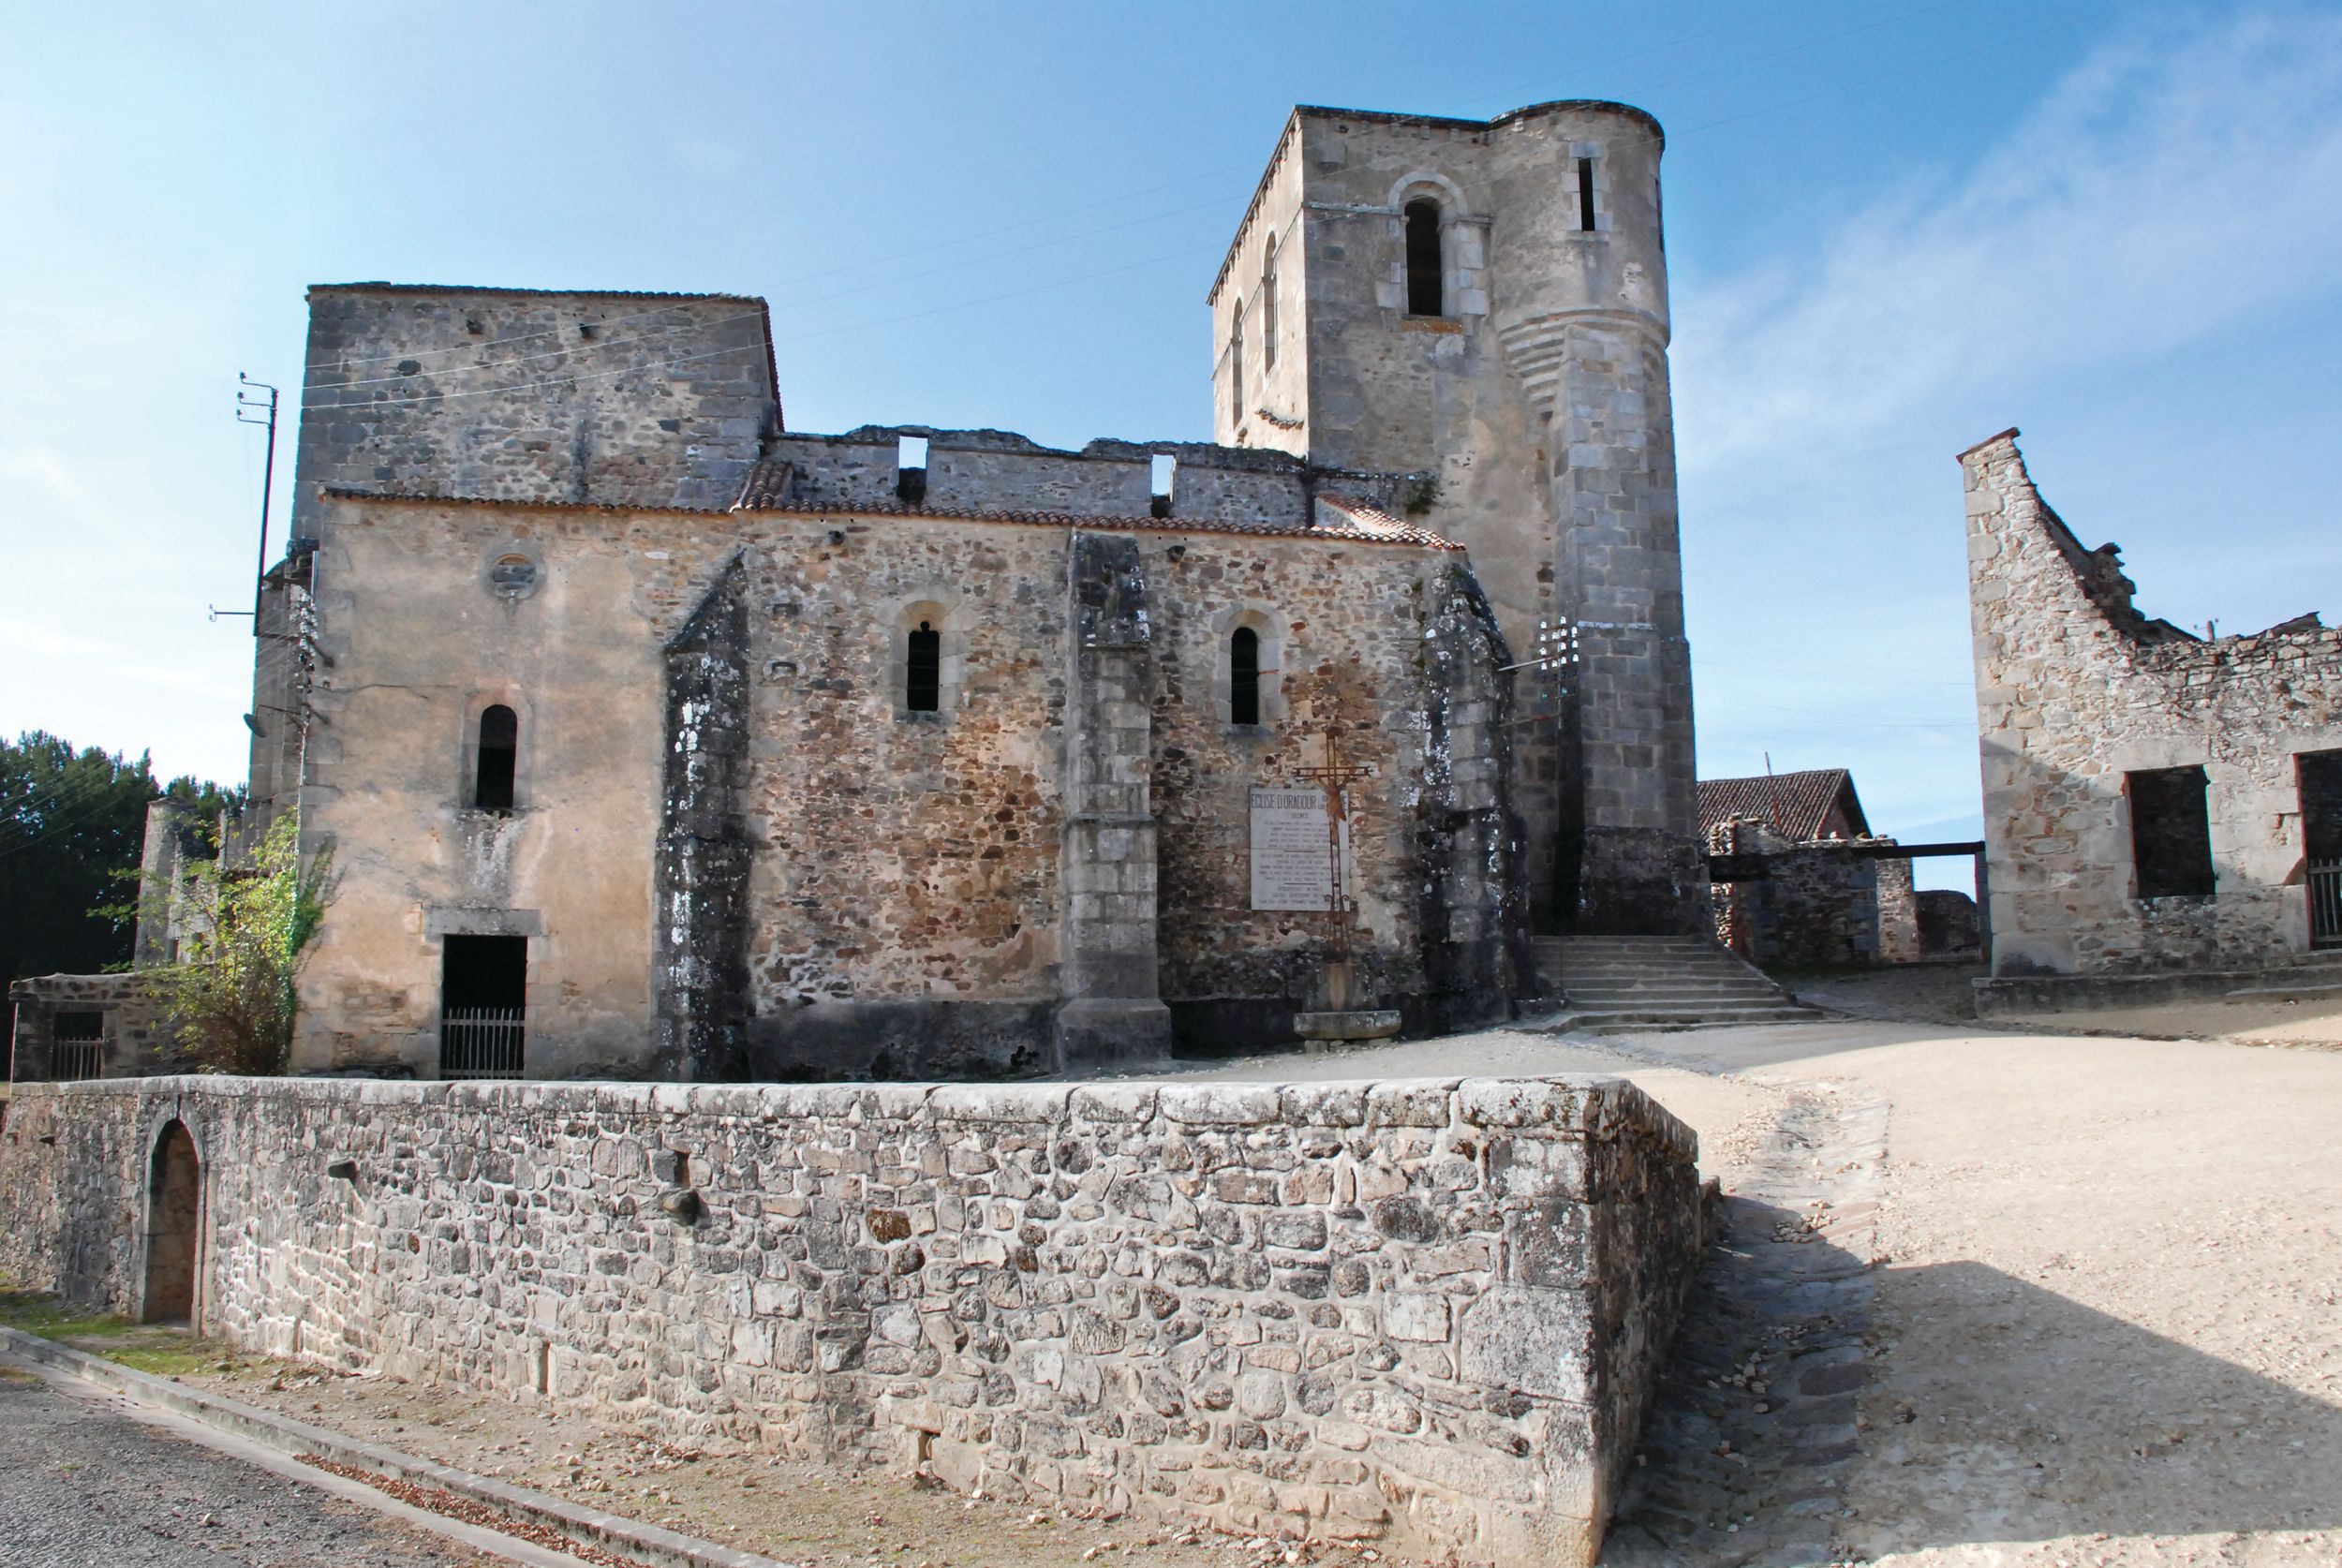 St Martin's  Church where all the women and children of Oradour were incarcerated, prior to being bombed, shot or burned to death. Only Marguerite Rouffanche survived.